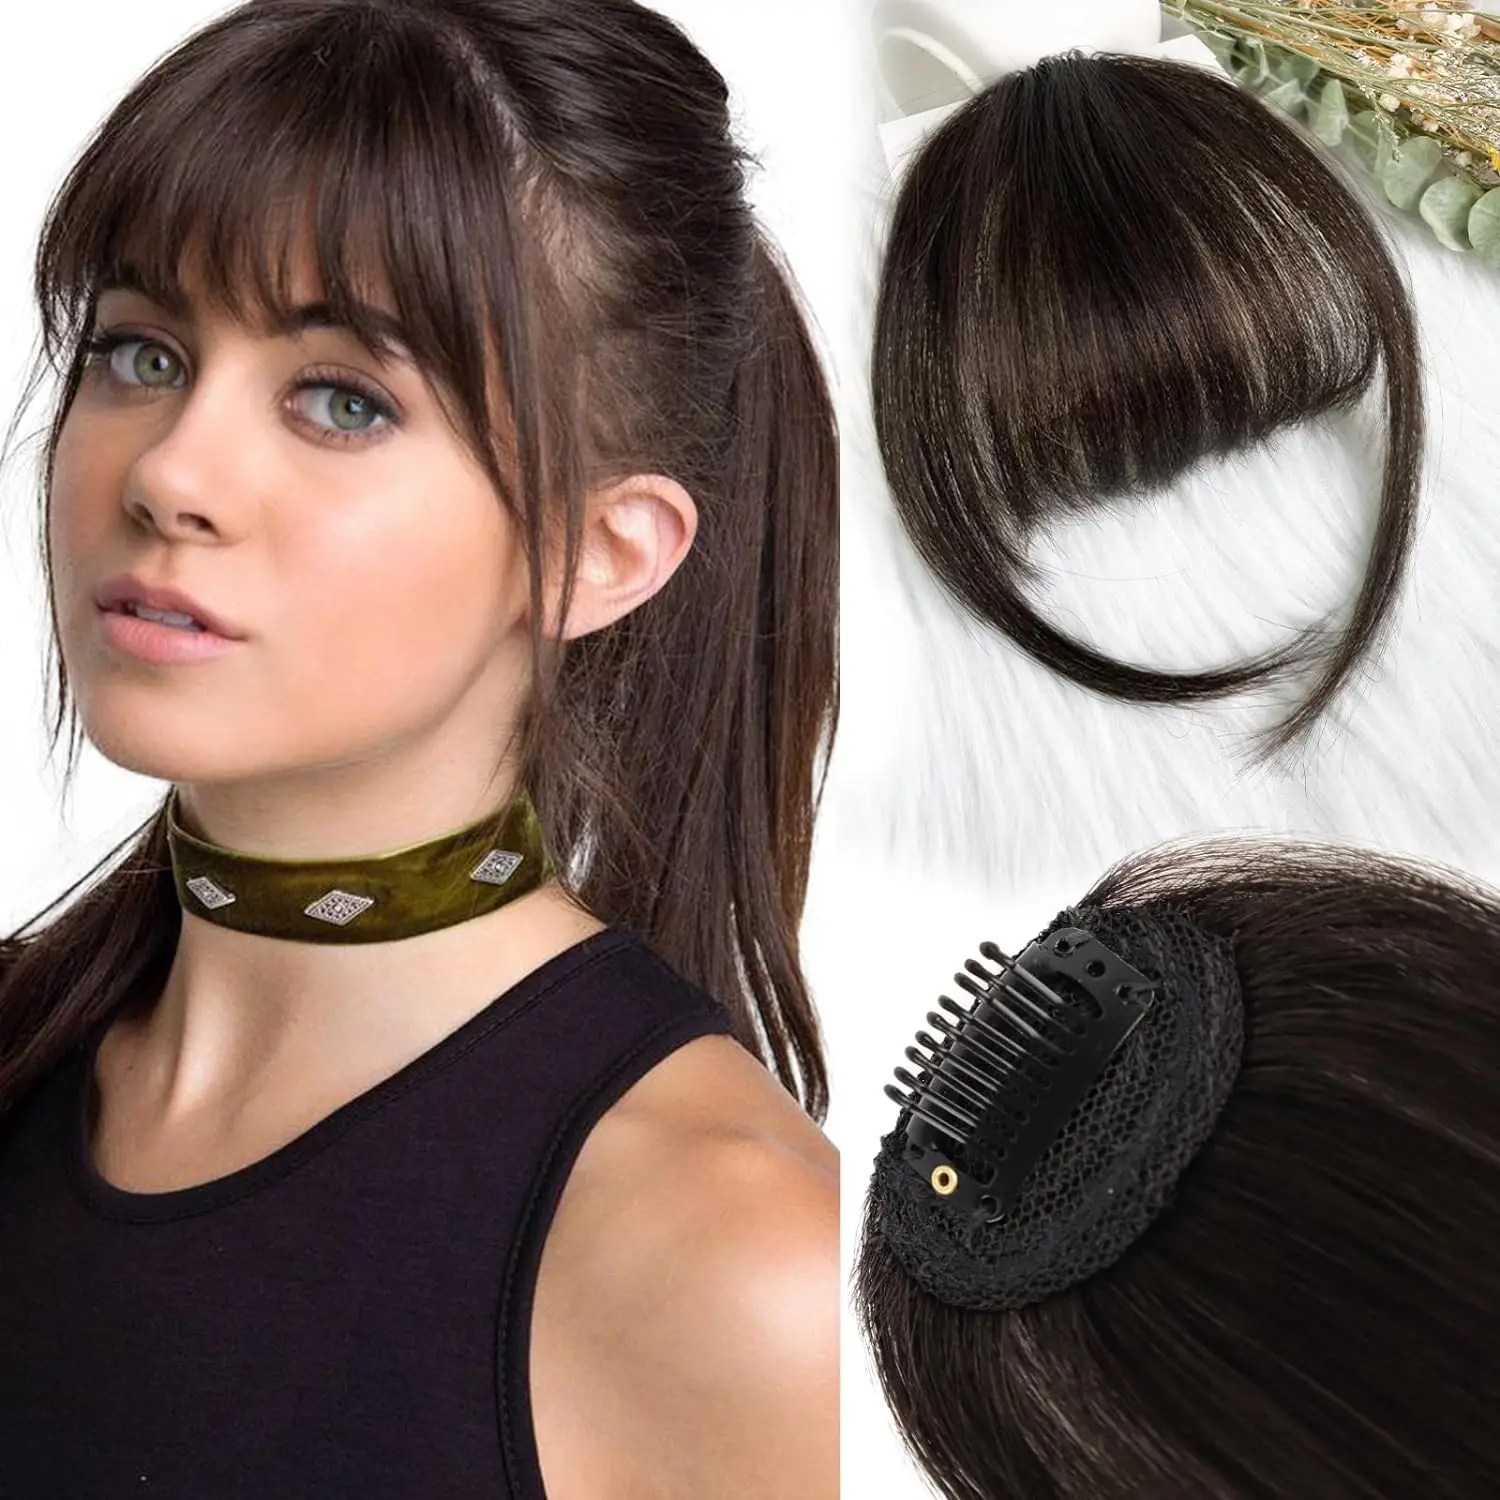 

Bangs Hair Clip in Bangs Wispy Bangs Fringe with Temples Hairpieces for Women Clip on Air Bangs Flat Neat Bangs Hair Extension